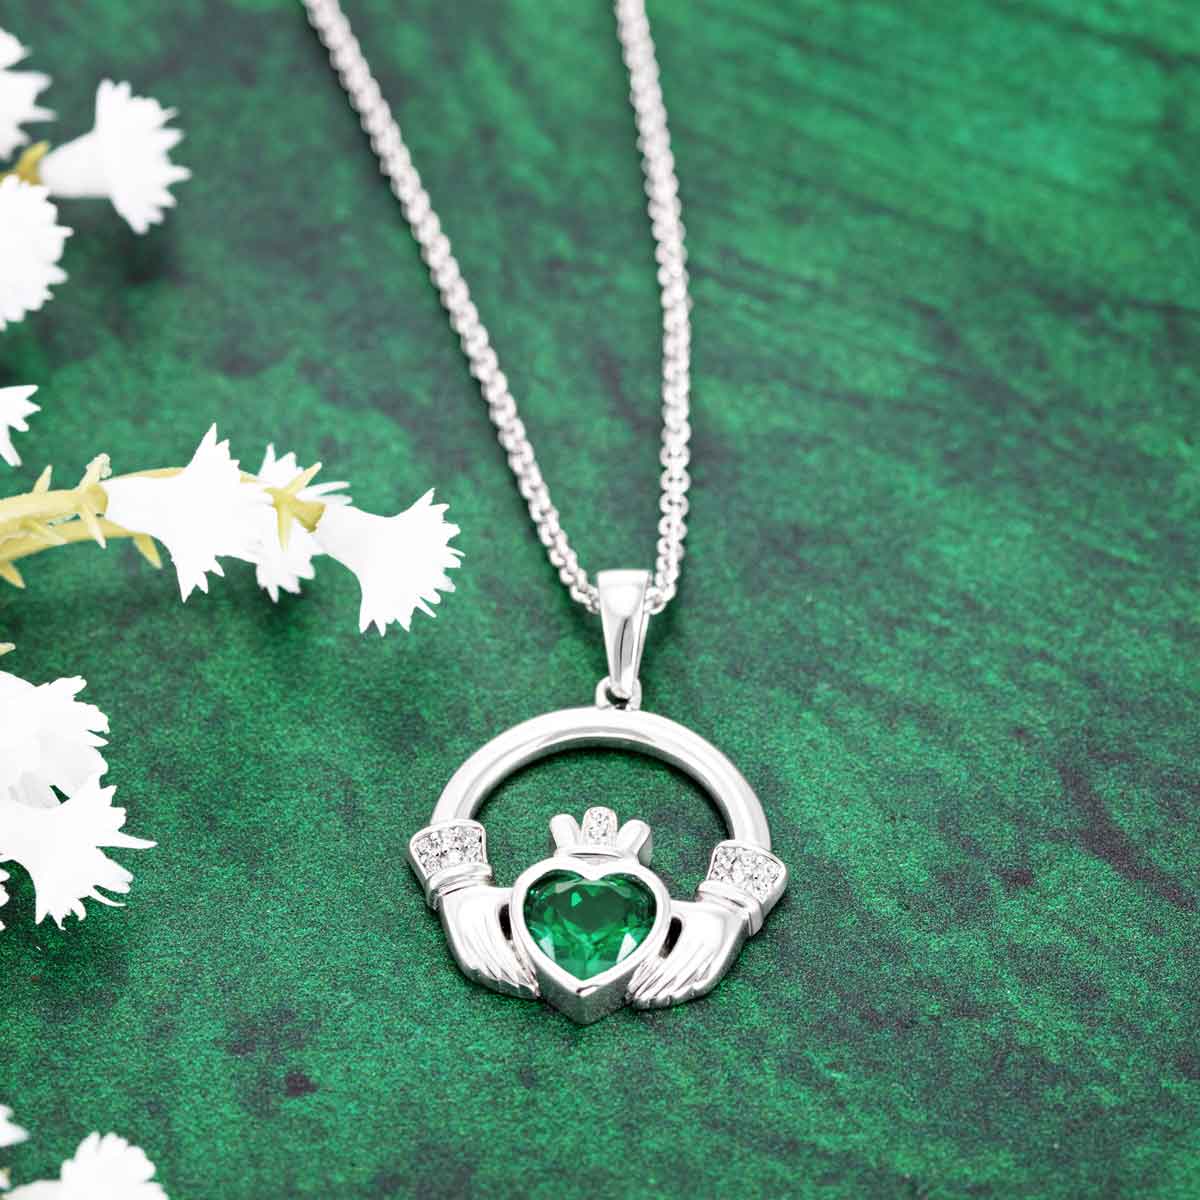 Product image for Irish Necklace | Sterling Silver Large Green Crystal Heart Claddagh Pendant